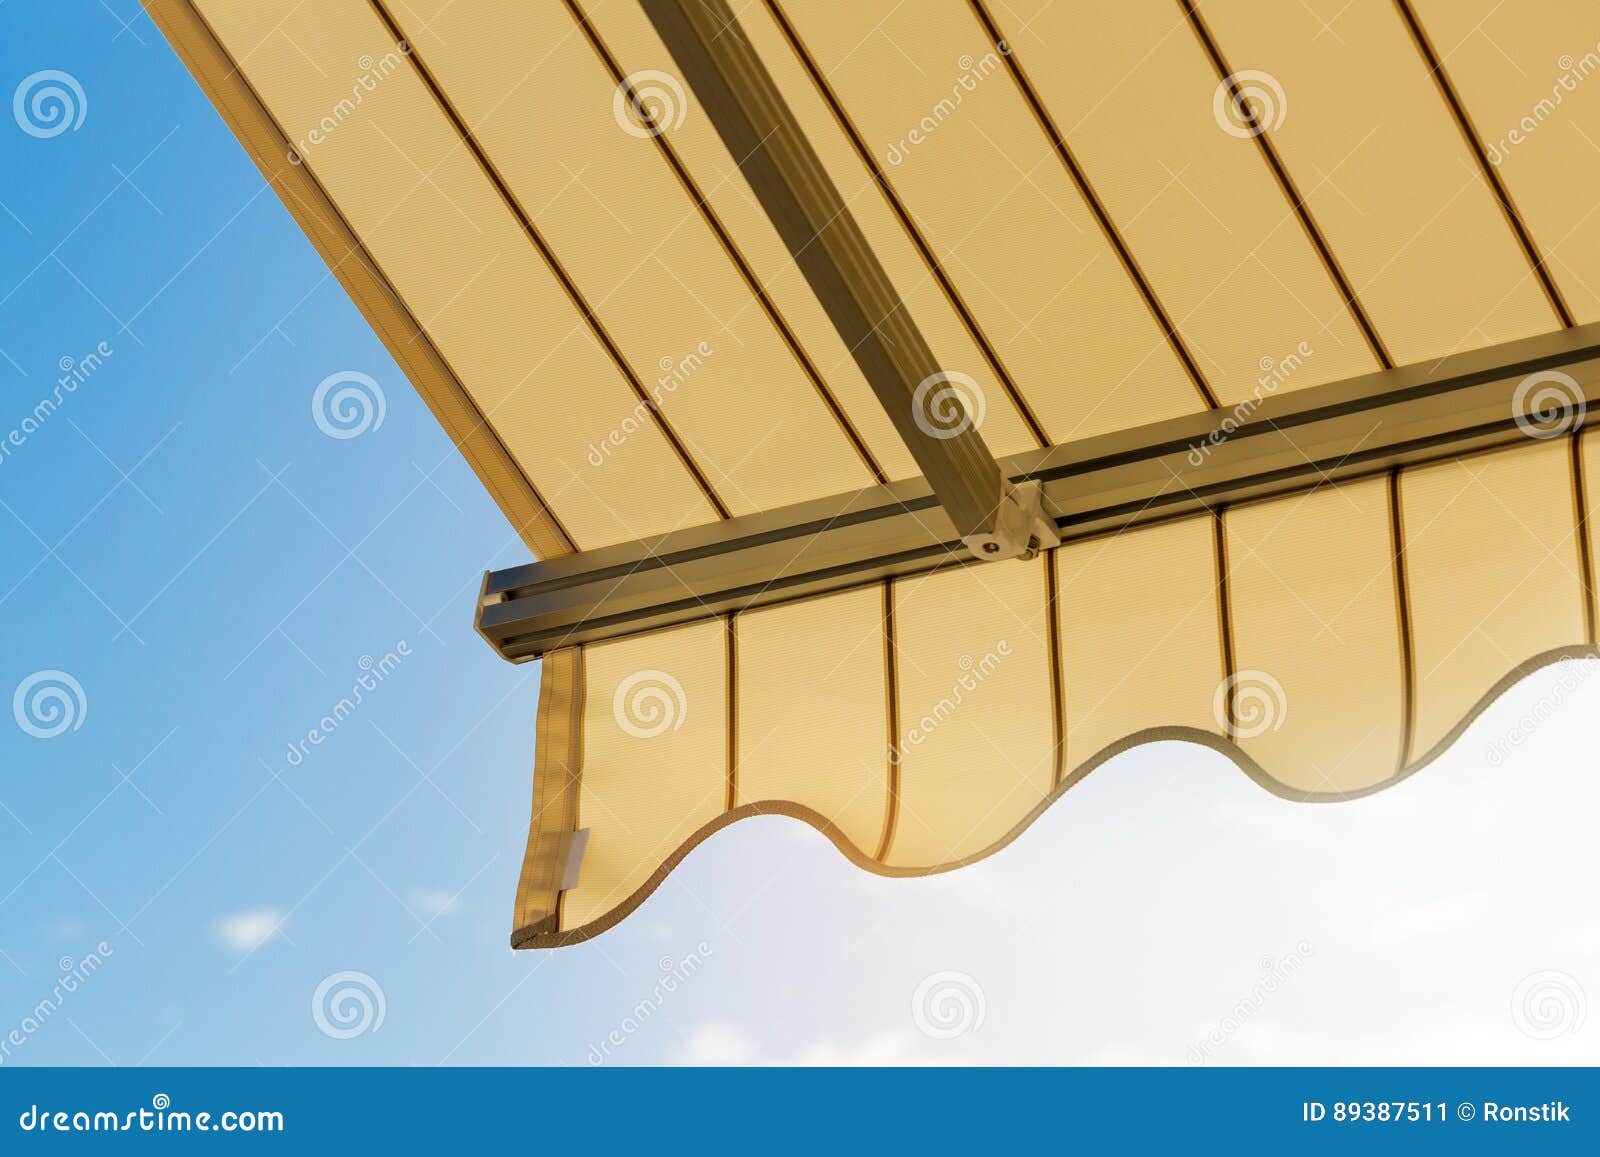 awning against blue sky